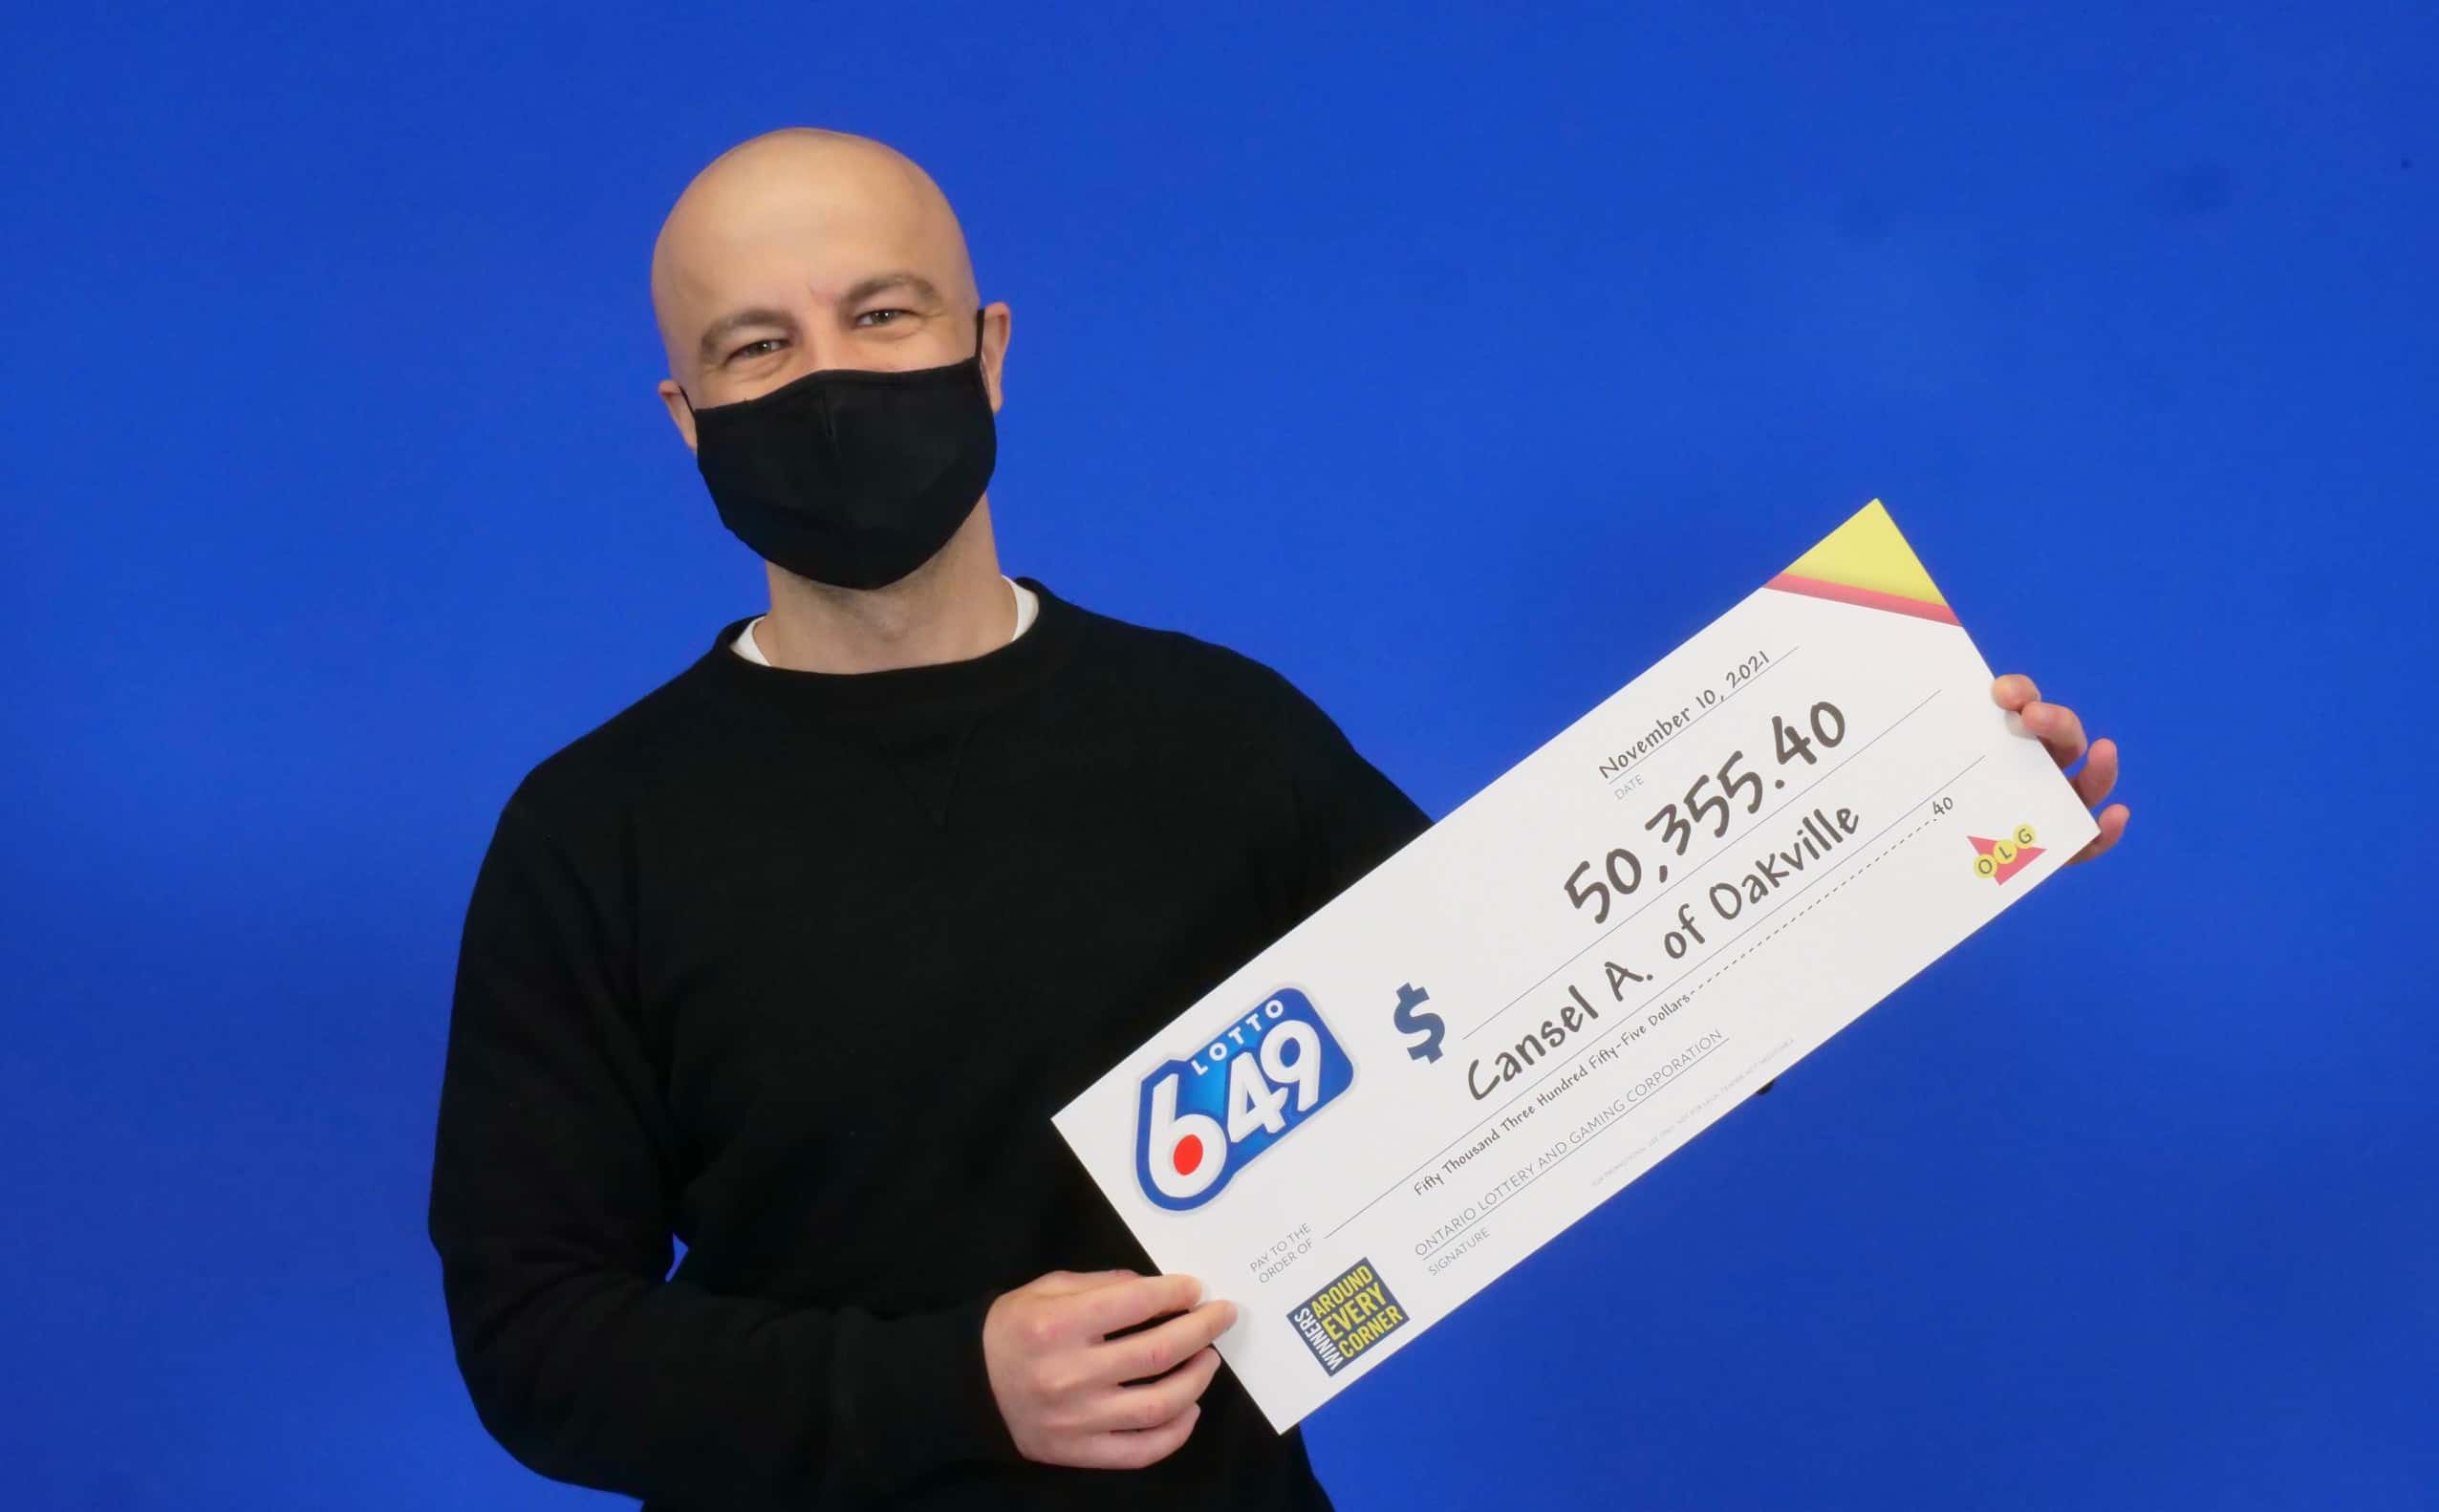 Get Lotto 6/49 tickets and play the lotto in BC 